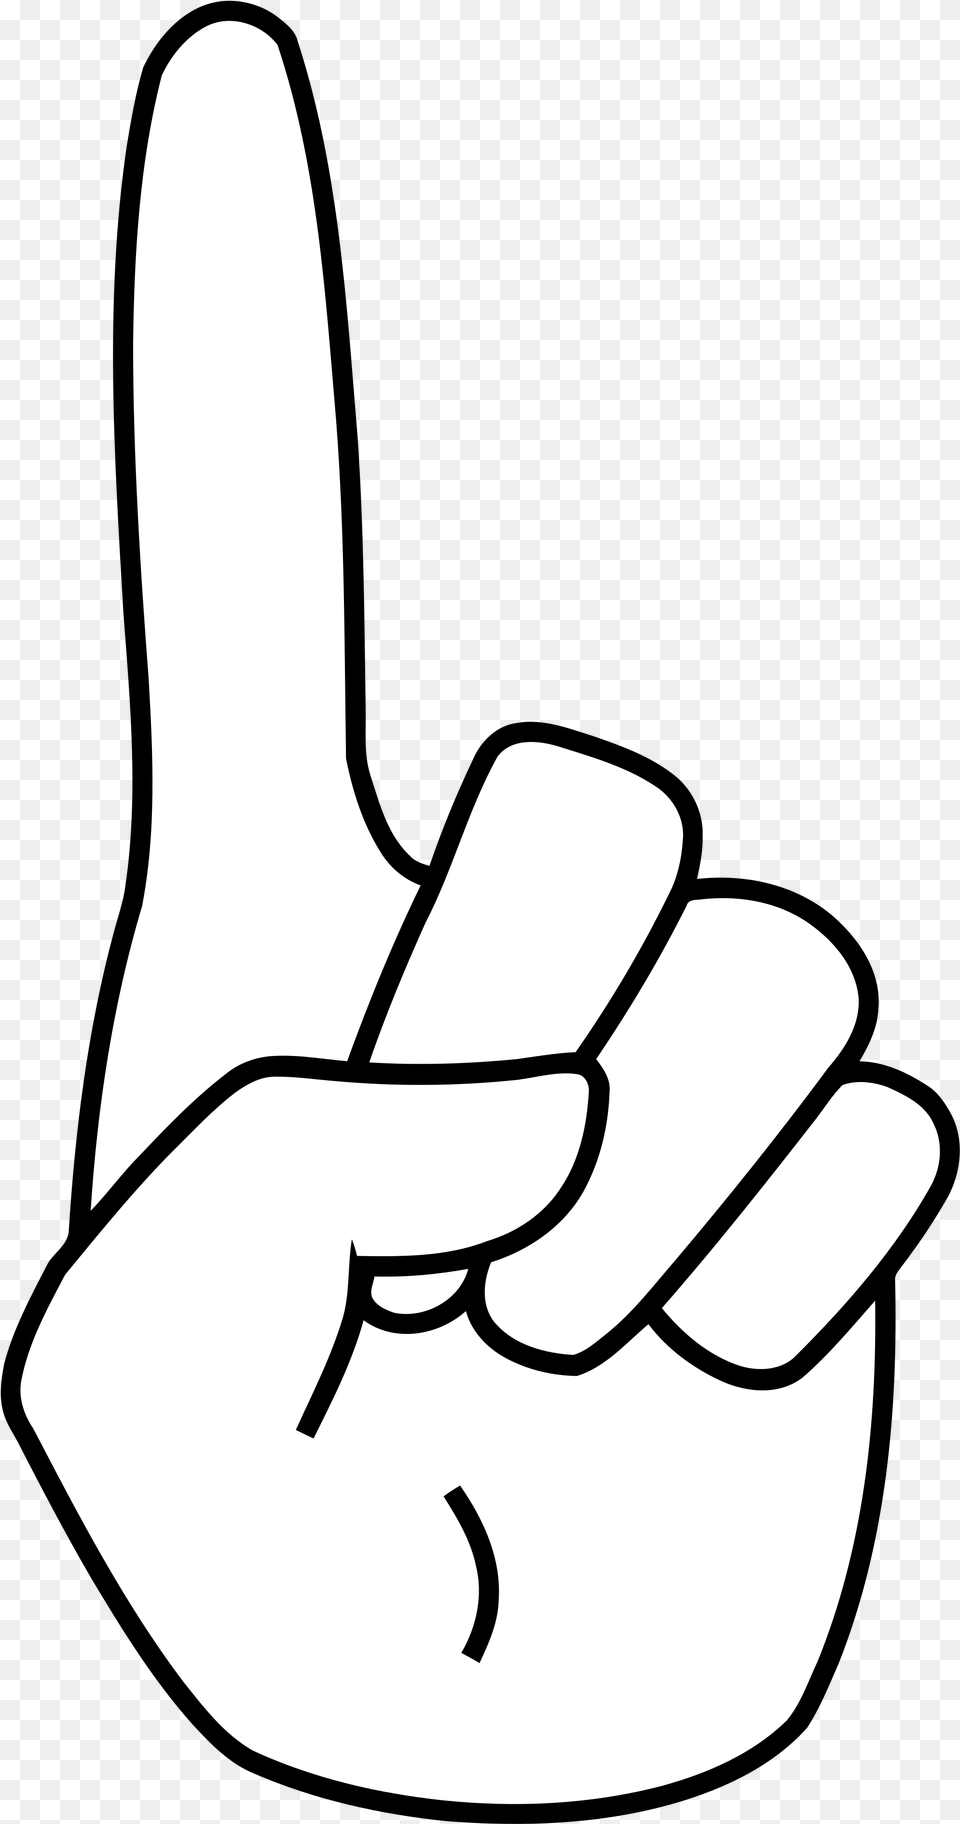 File Hand Svg Wikimedia Commons Open Hand Number 1, Body Part, Finger, Person Png Image